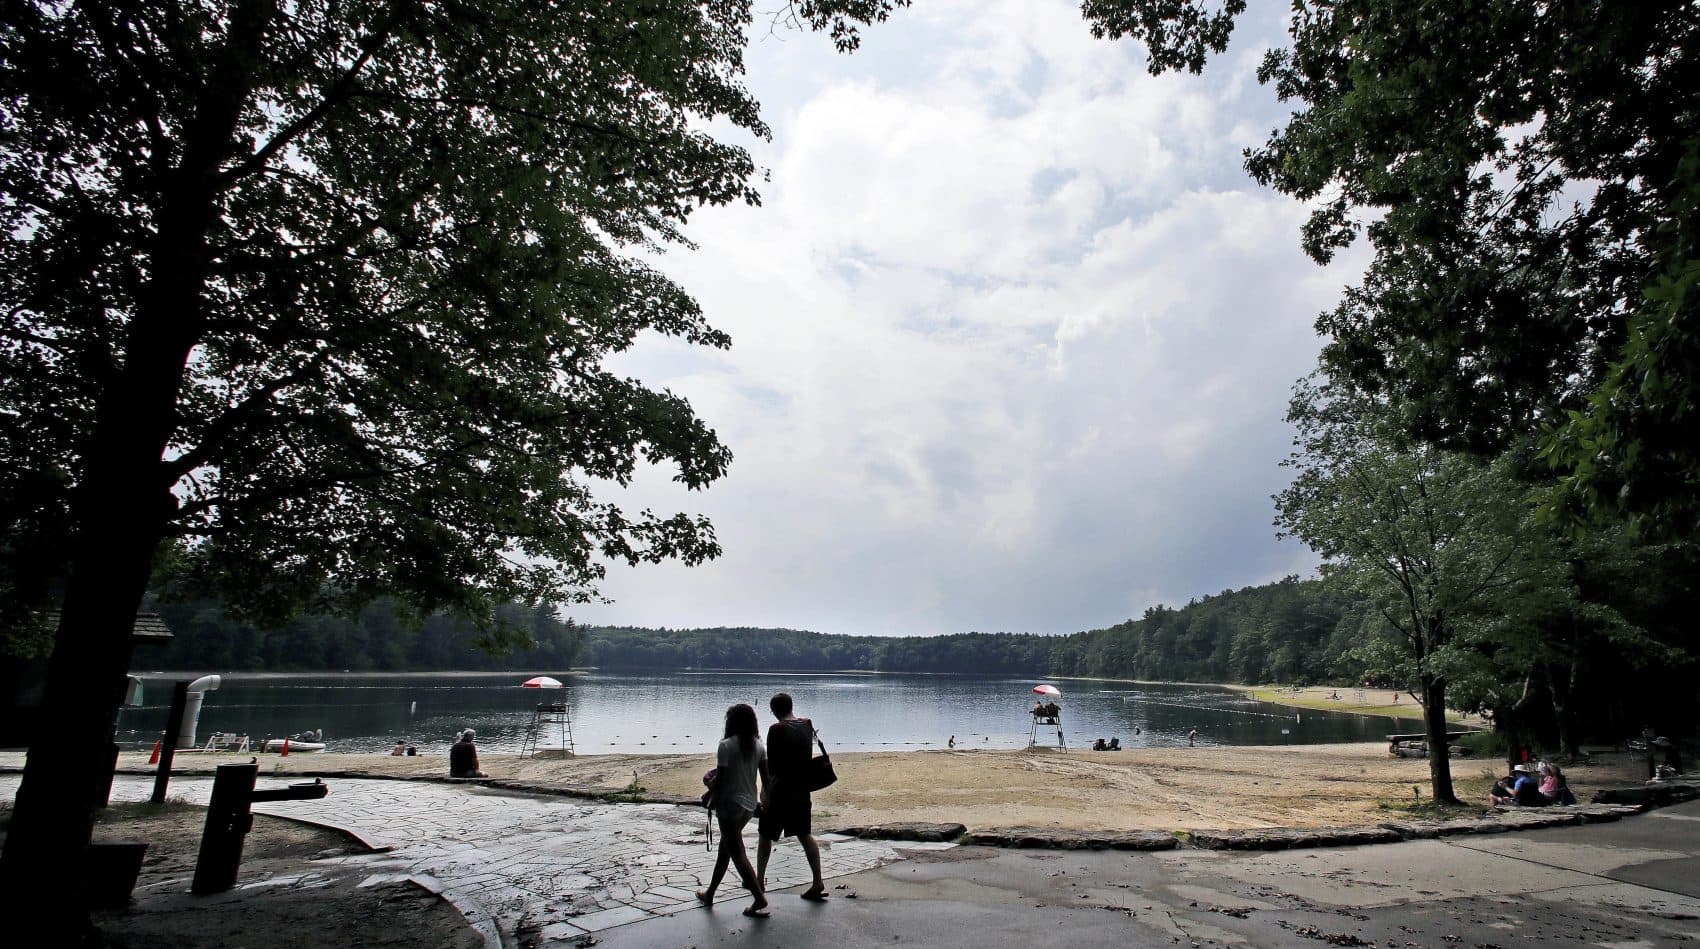 A couple walks along the shore of Walden Pond in Concord, Mass. in 2017. (Charles Krupa/AP)